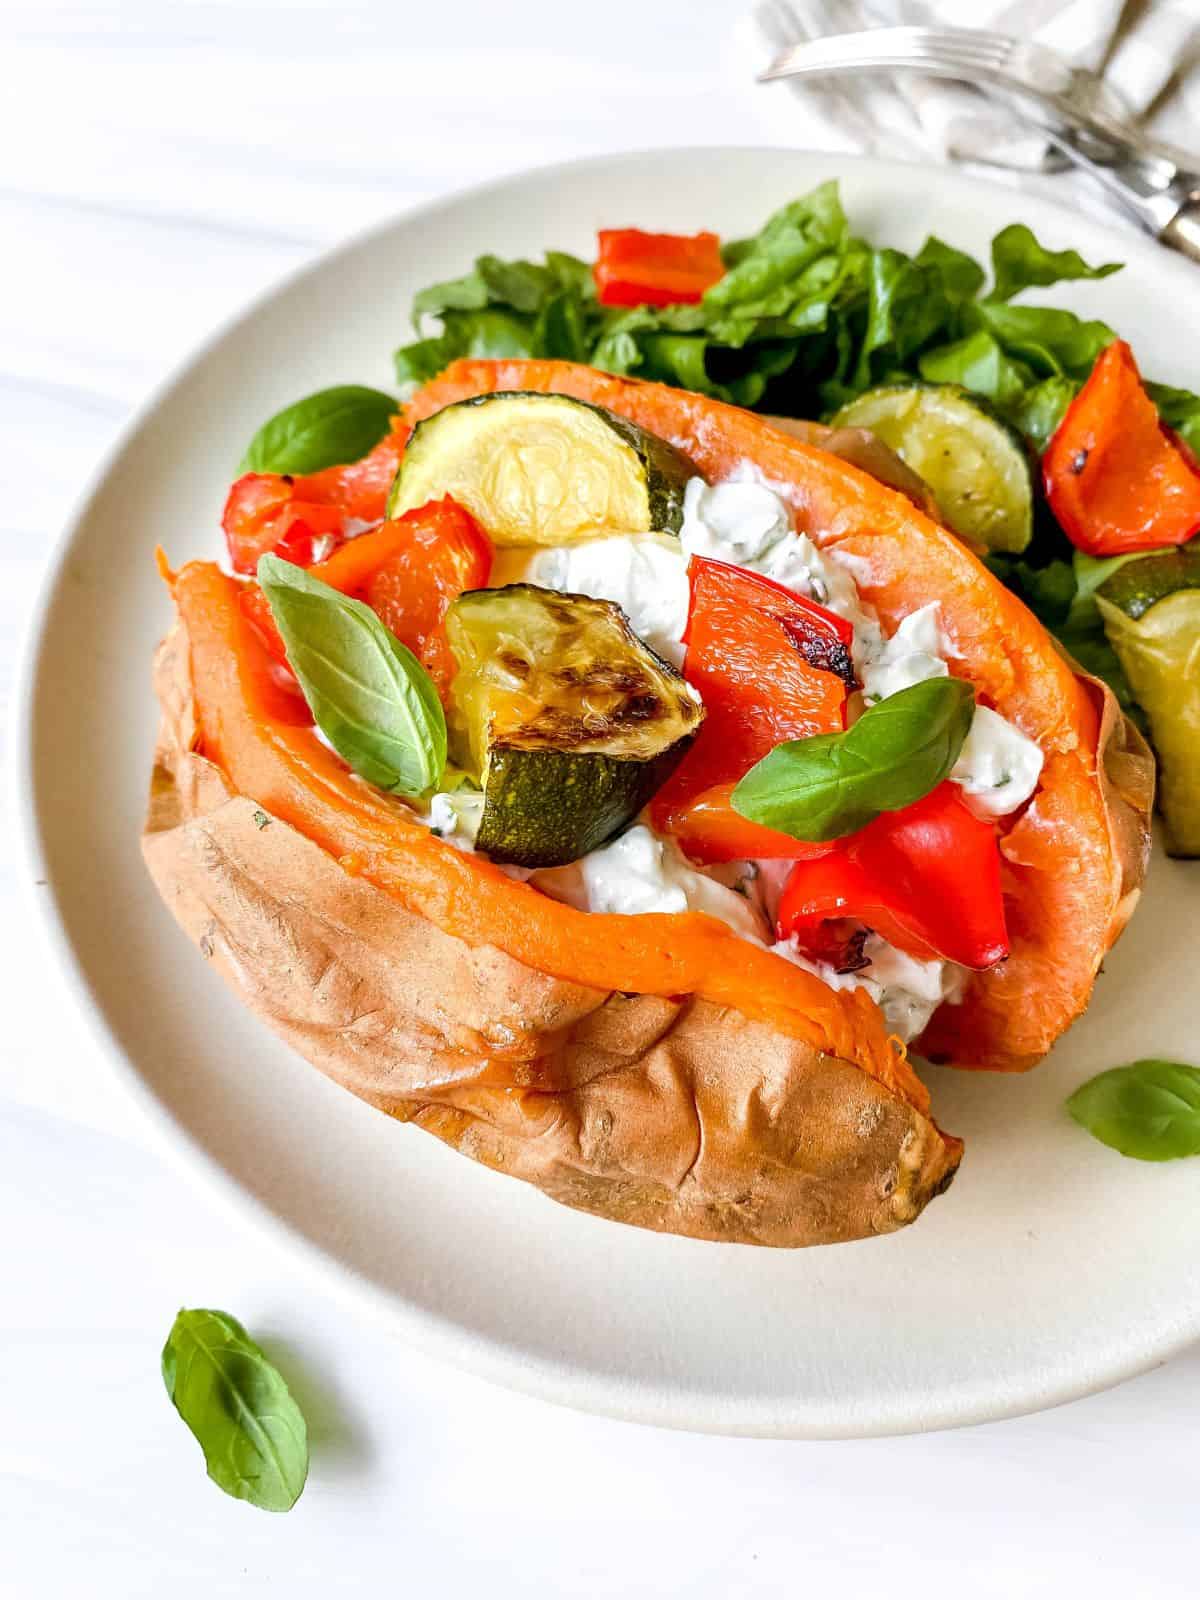 cream cheese stuffed sweet potato in a white plate with lettuce and roasted vegetables.